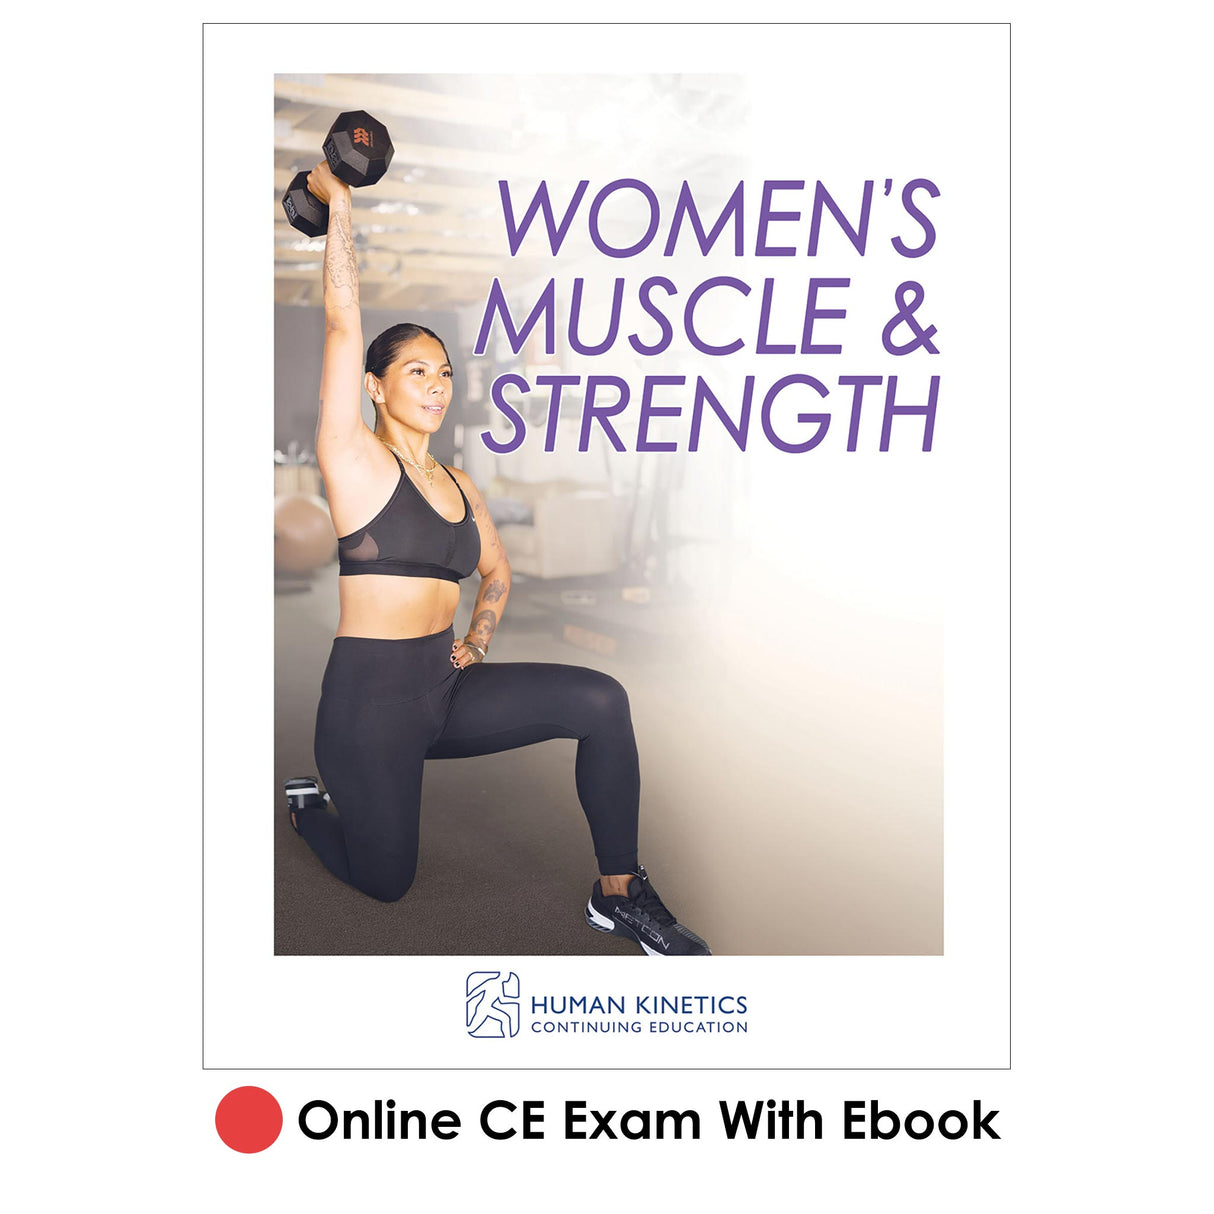 Women’s Muscle & Strength Online CE Exam With Ebook